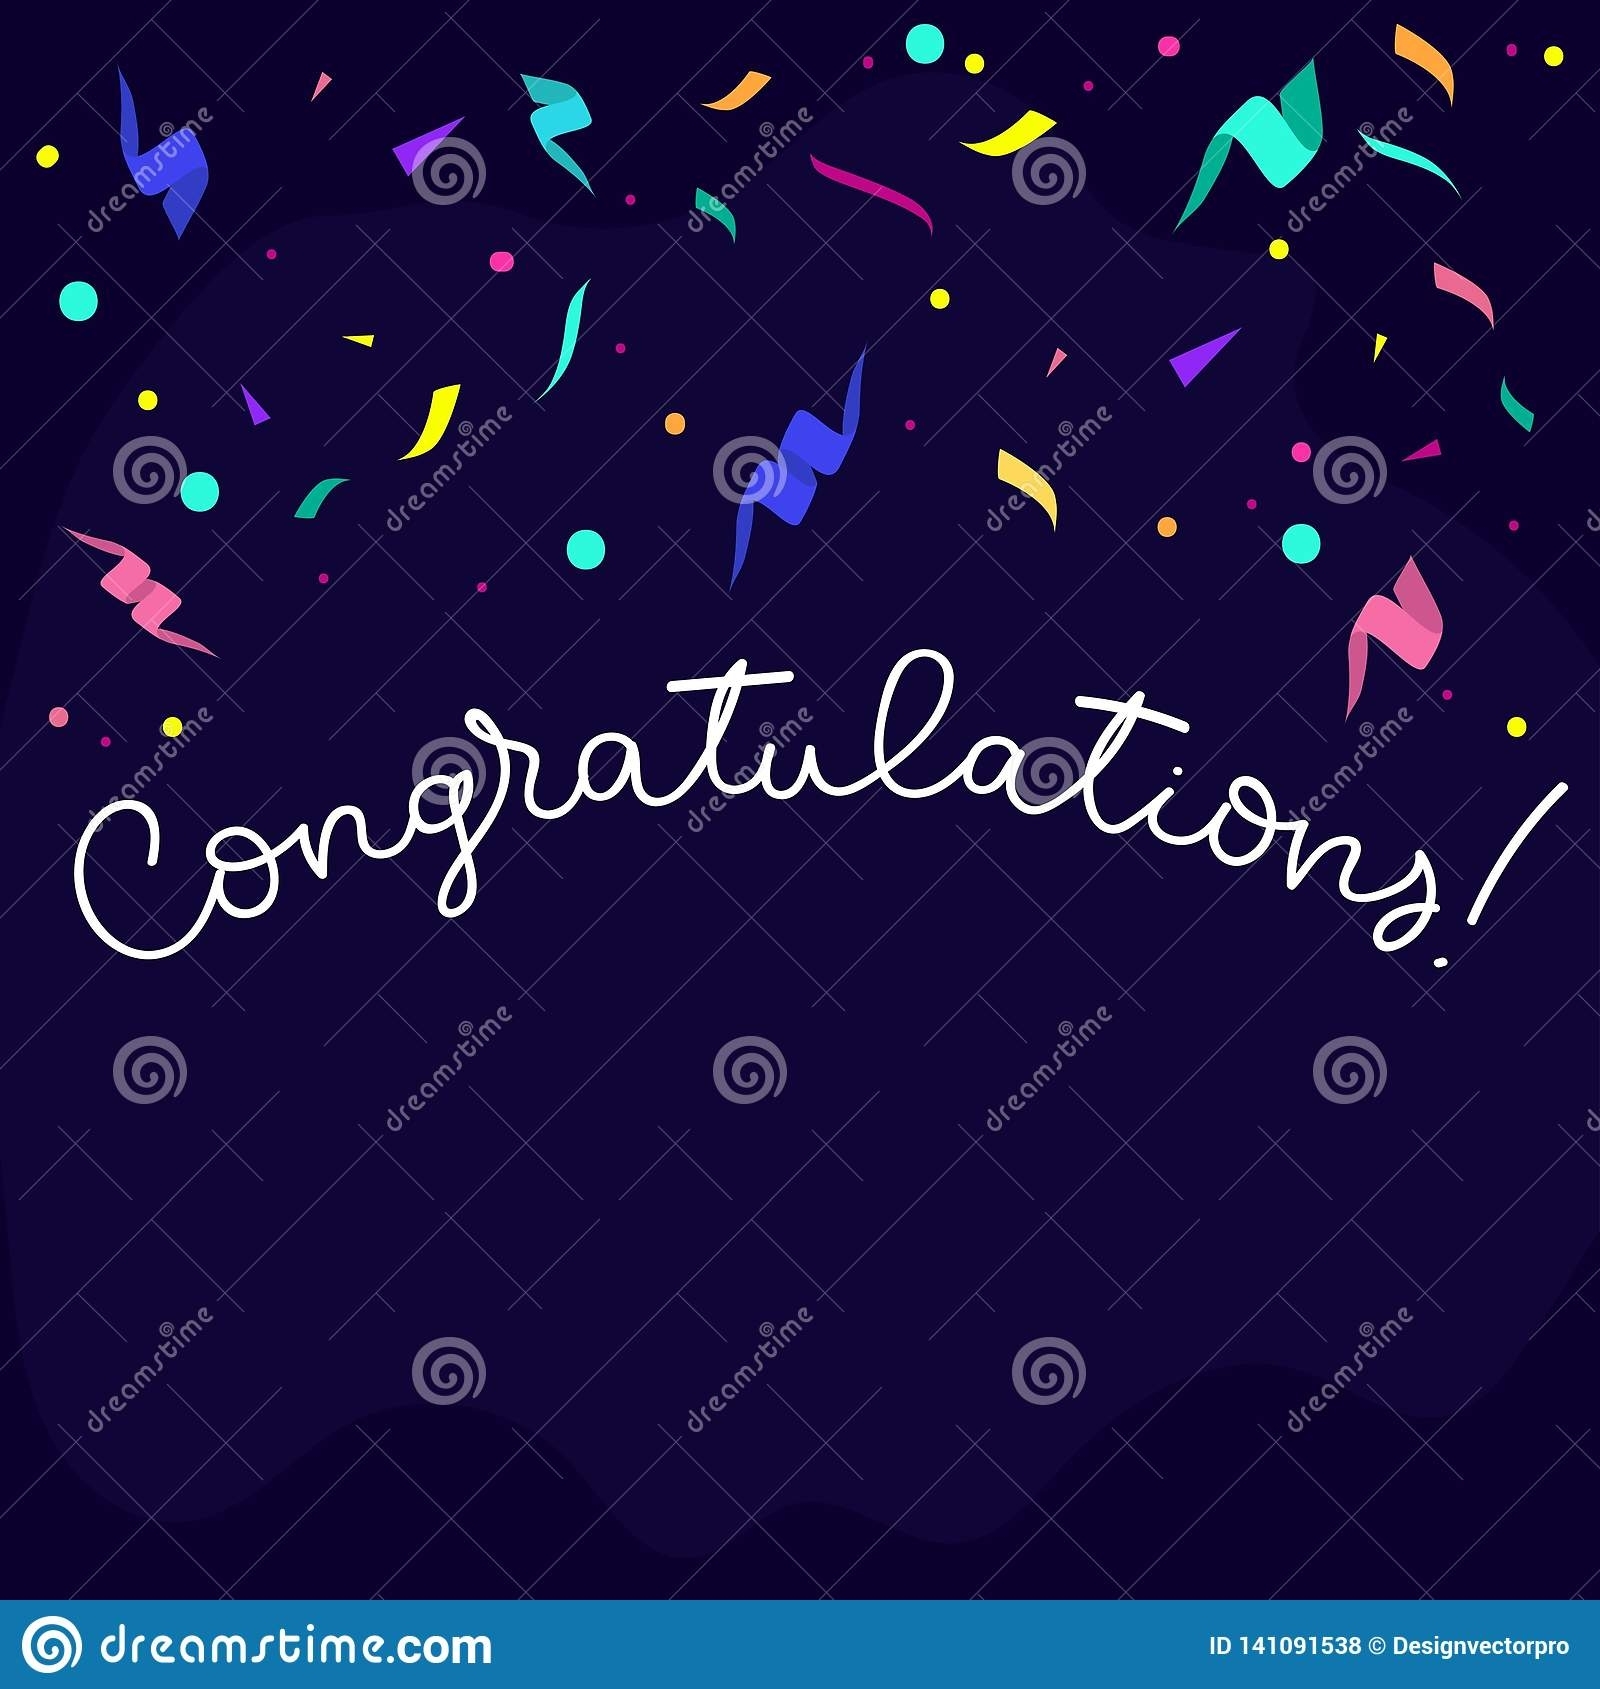 Congratulations Banner Design In Flat Style With Confetti, Ribbons And Pertaining To Congratulations Banner Template